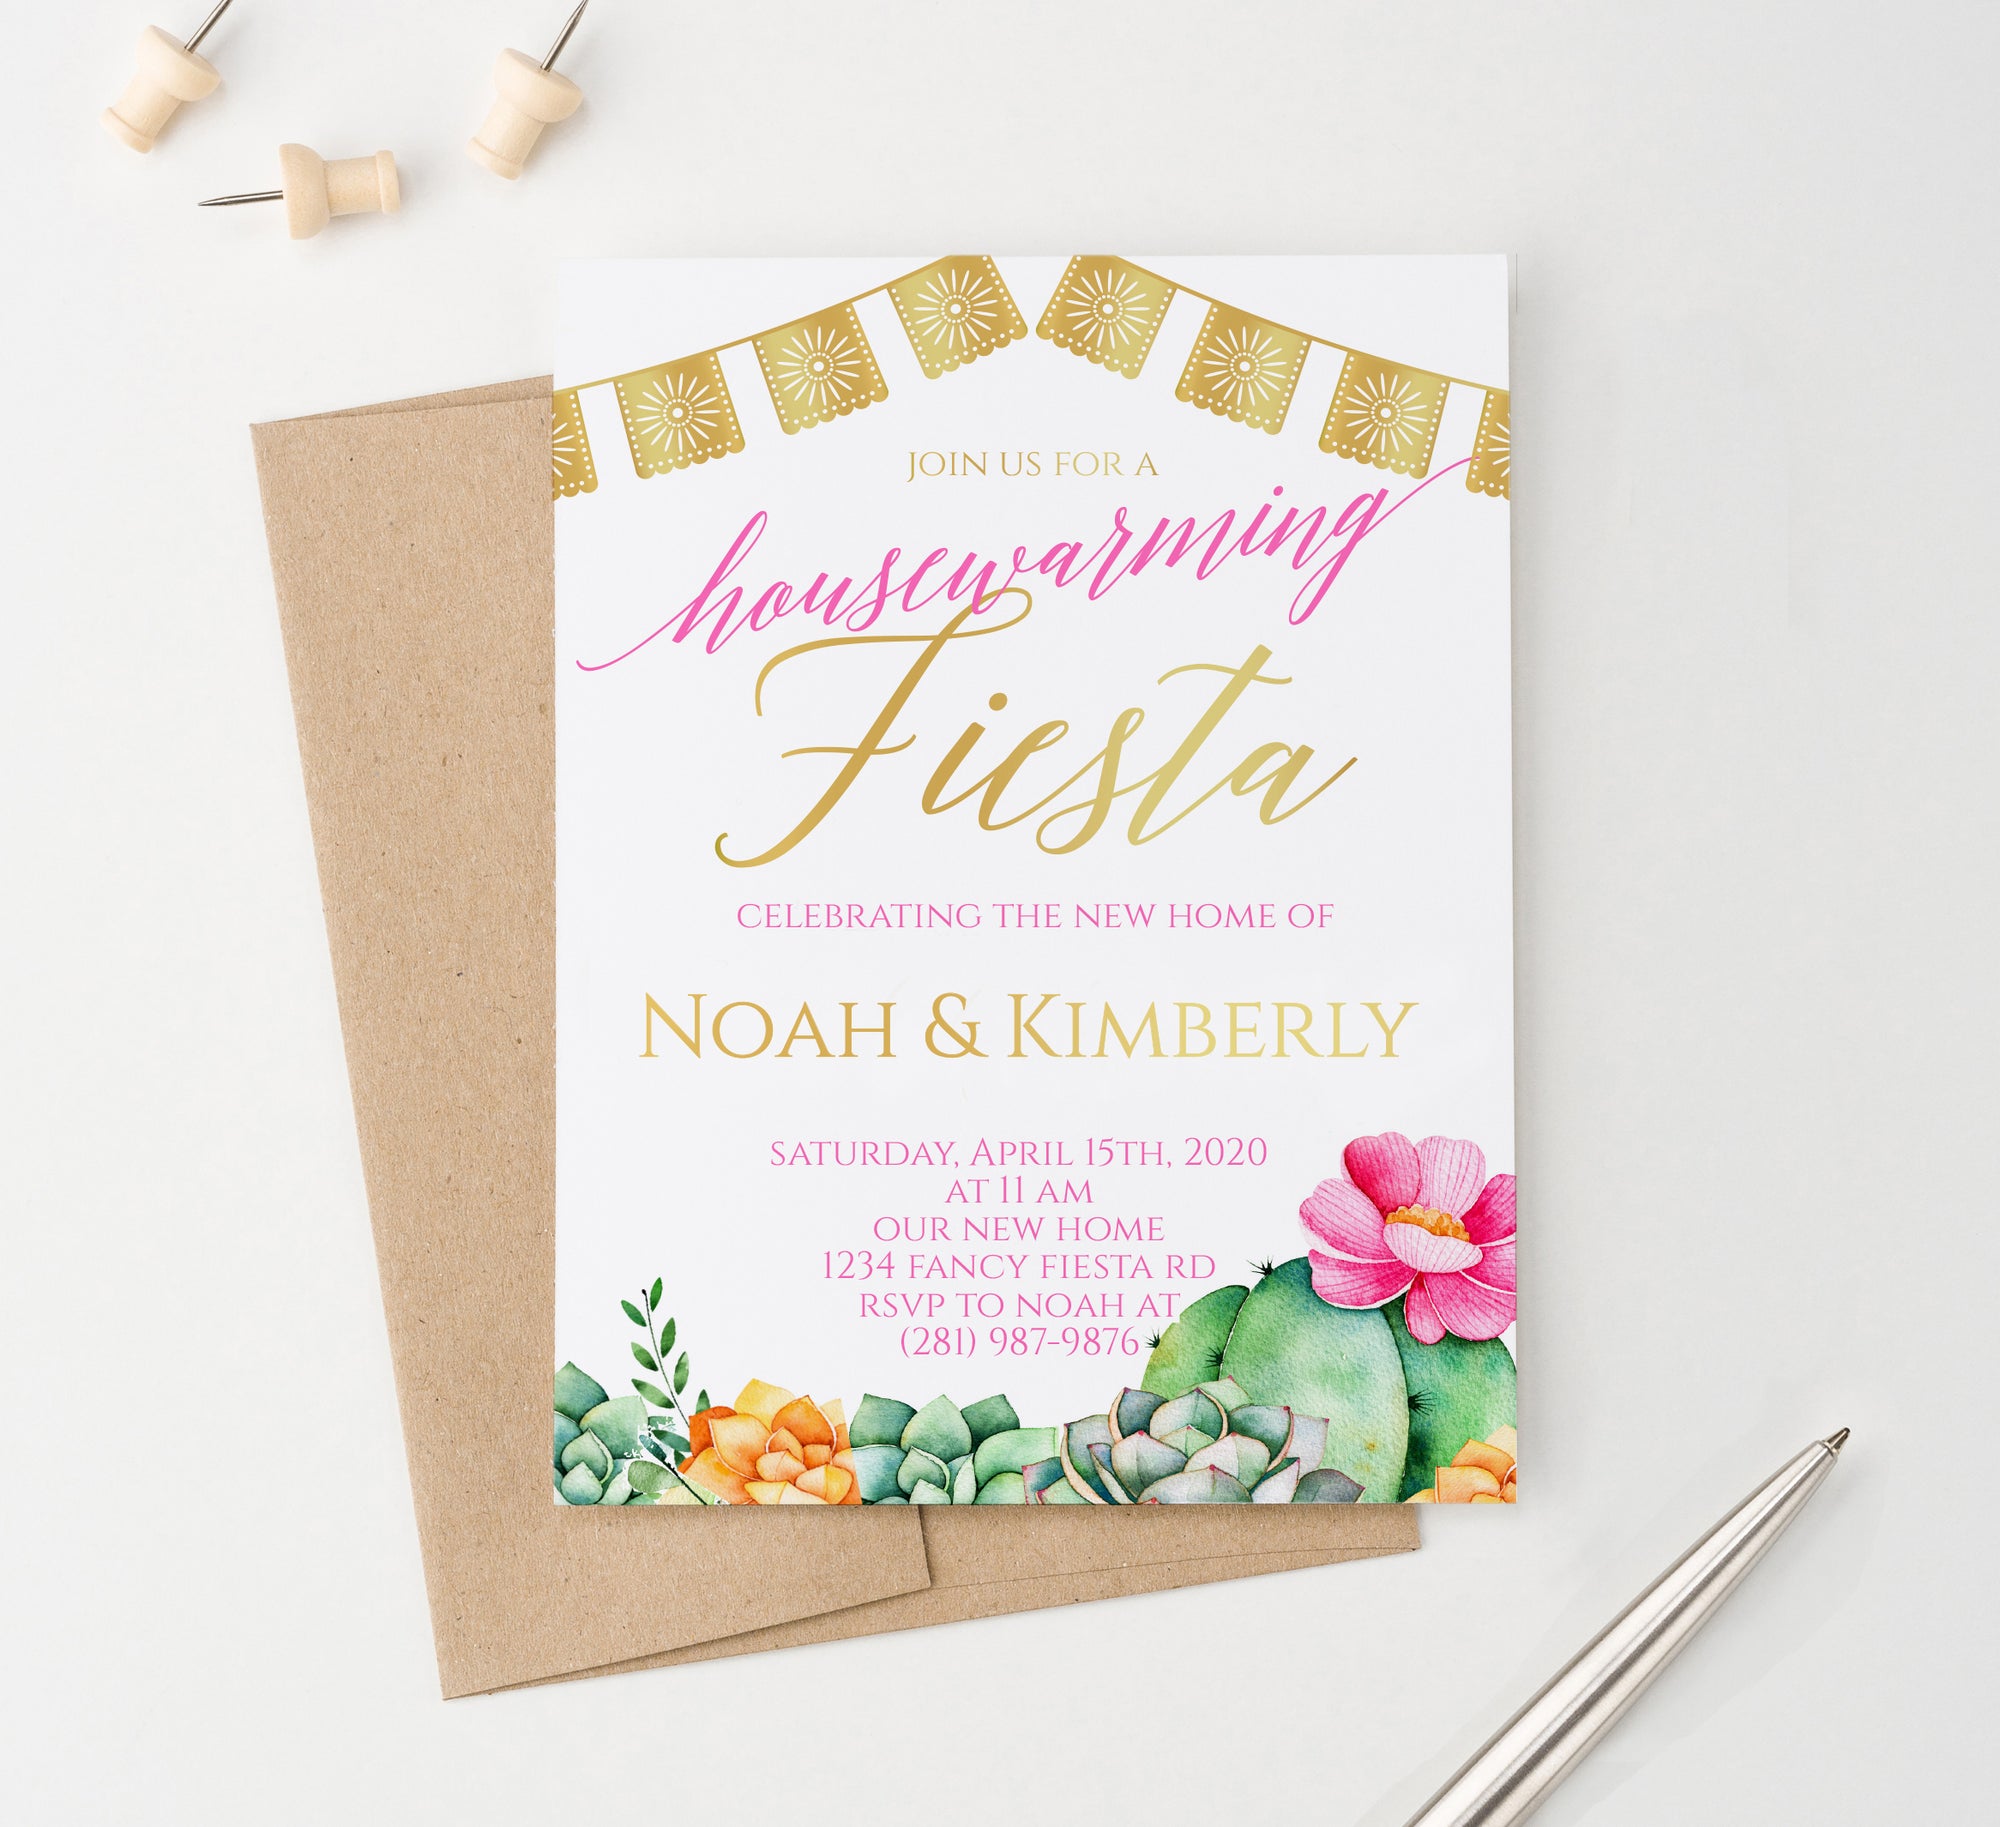 Personalized Fiesta Housewarming Invitations With Succulents